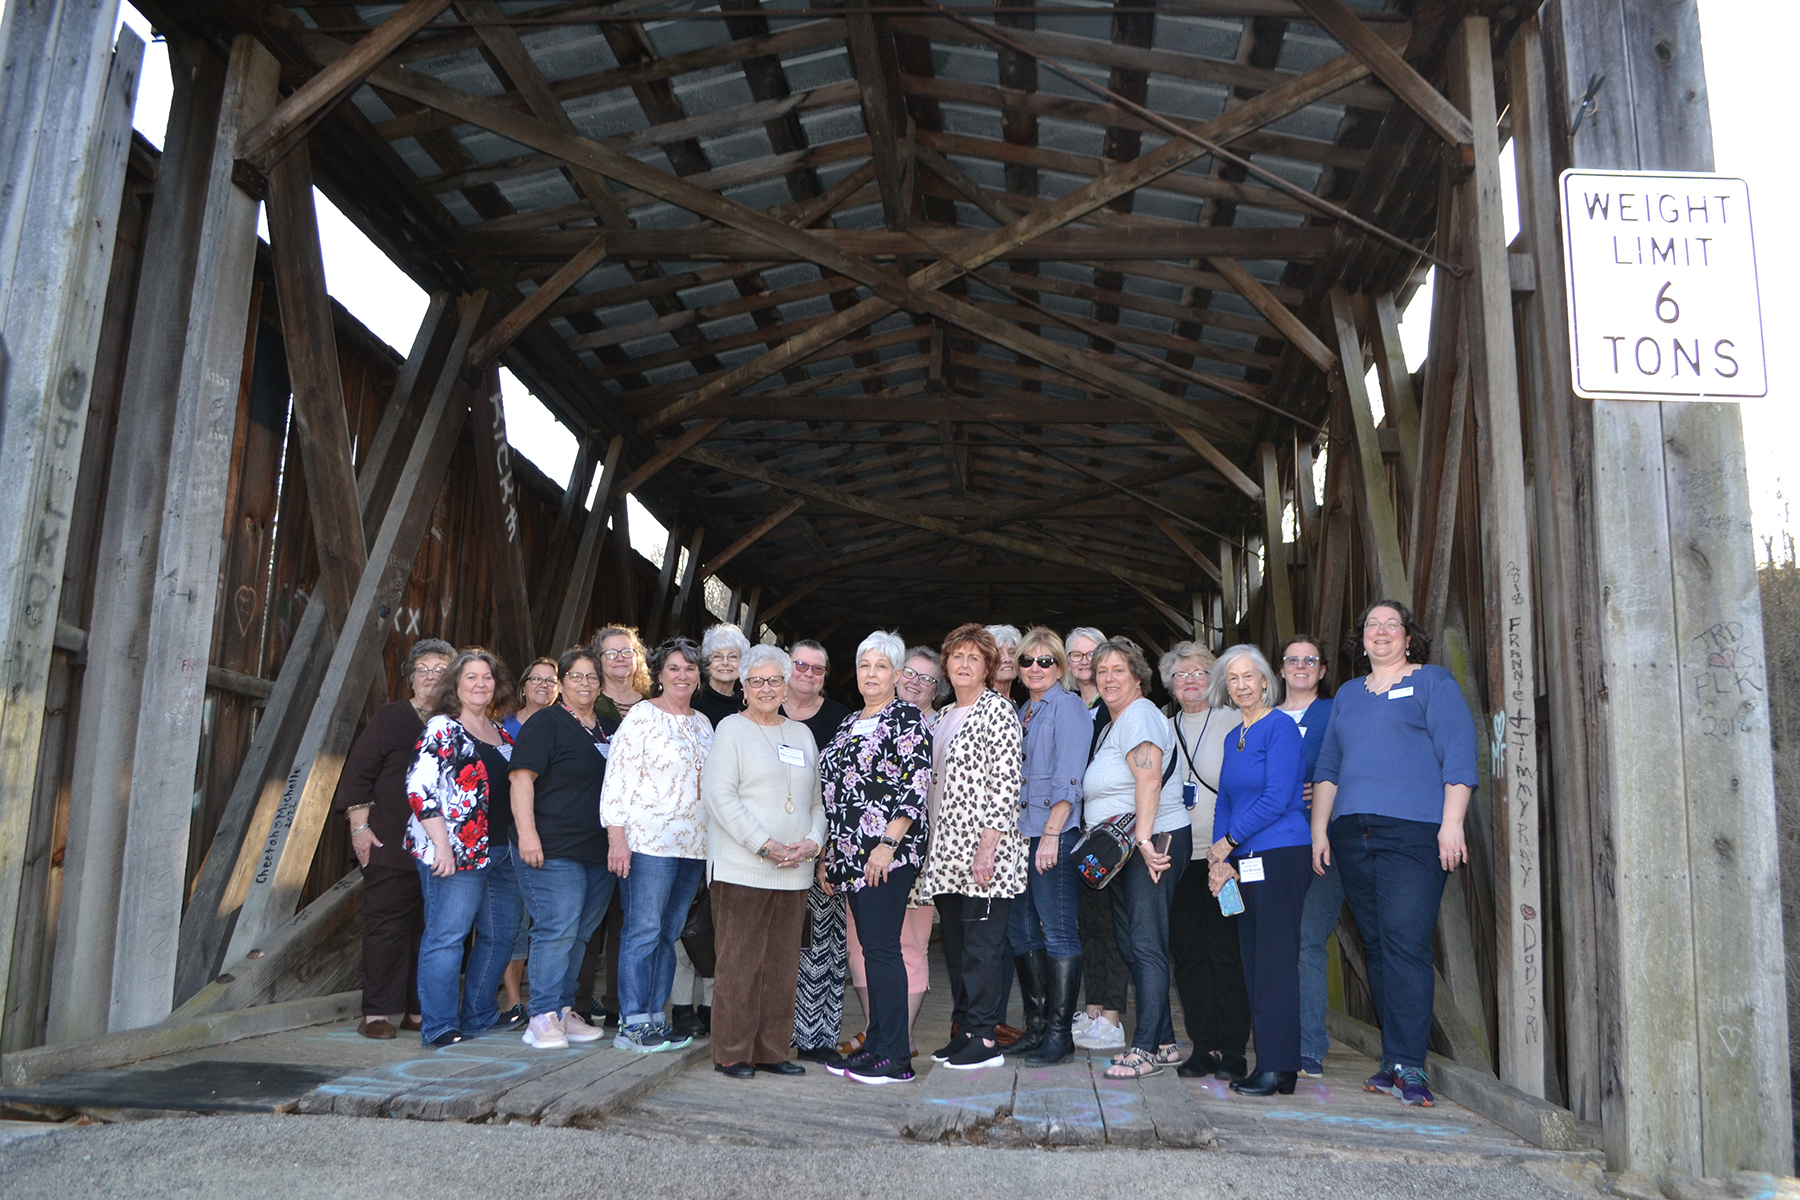 On March 1, the group visited the Johnson Creek Covered Bridge in Robertson County.